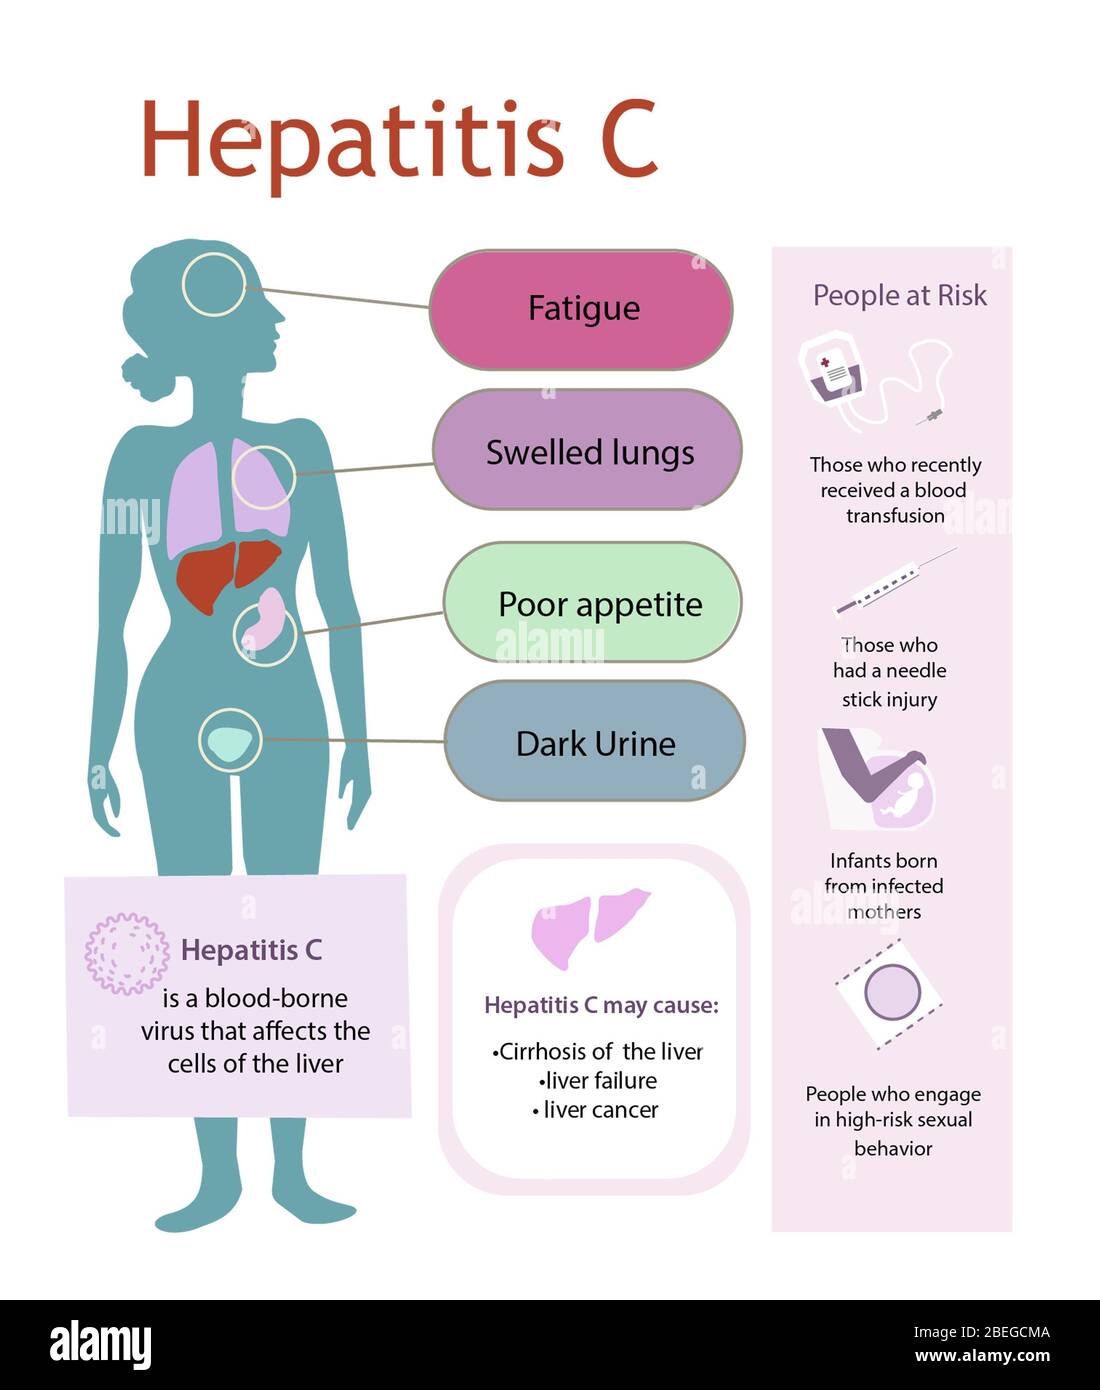 Hepatitis C - diagram indicating the effects of Hepatitis C, description of the illness and other facts. Stock Photo